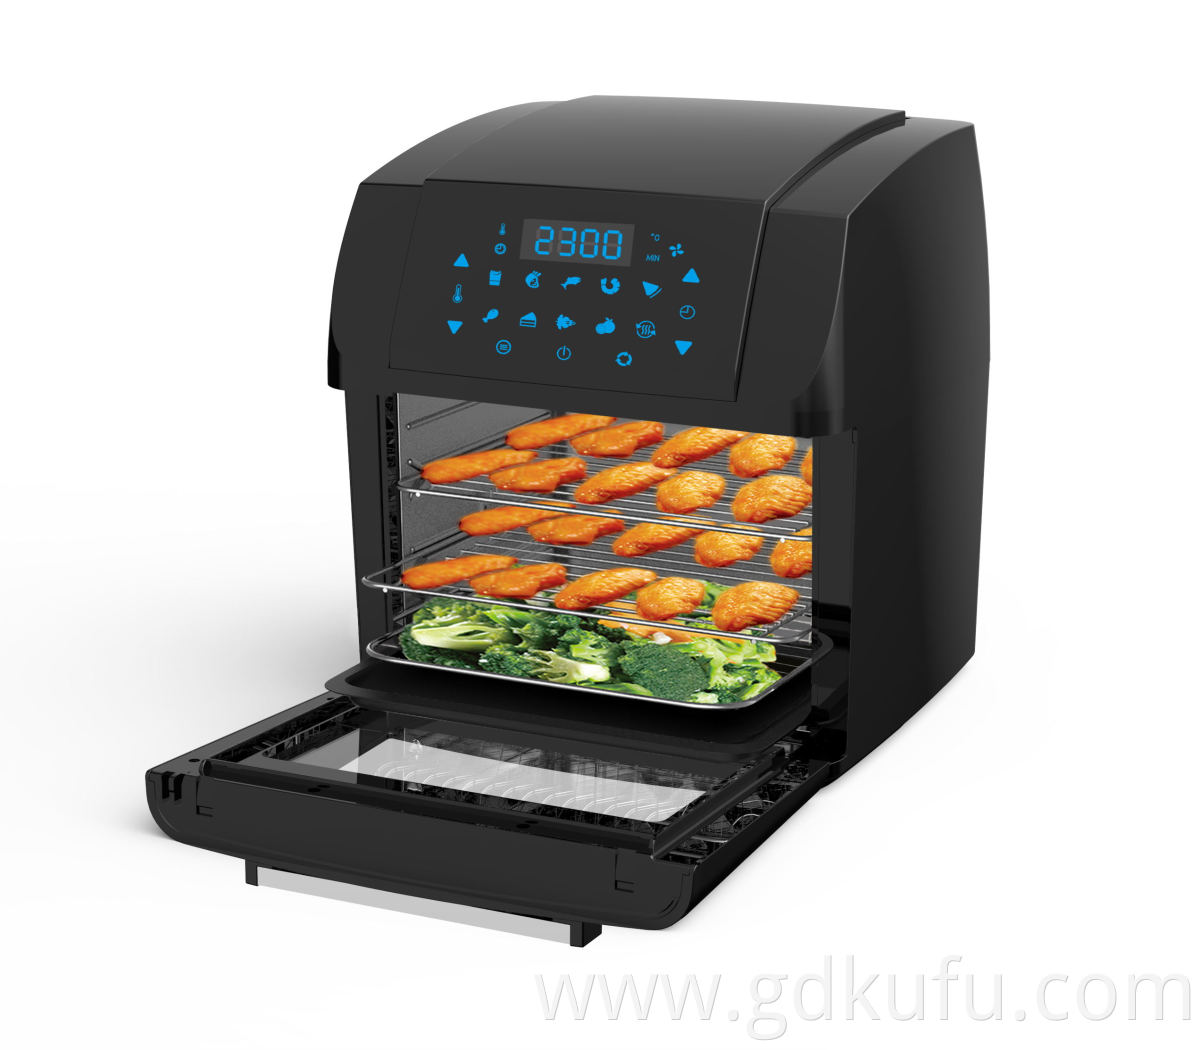 Automatic Healthy Oil Free Cooking Air Fryer Oven